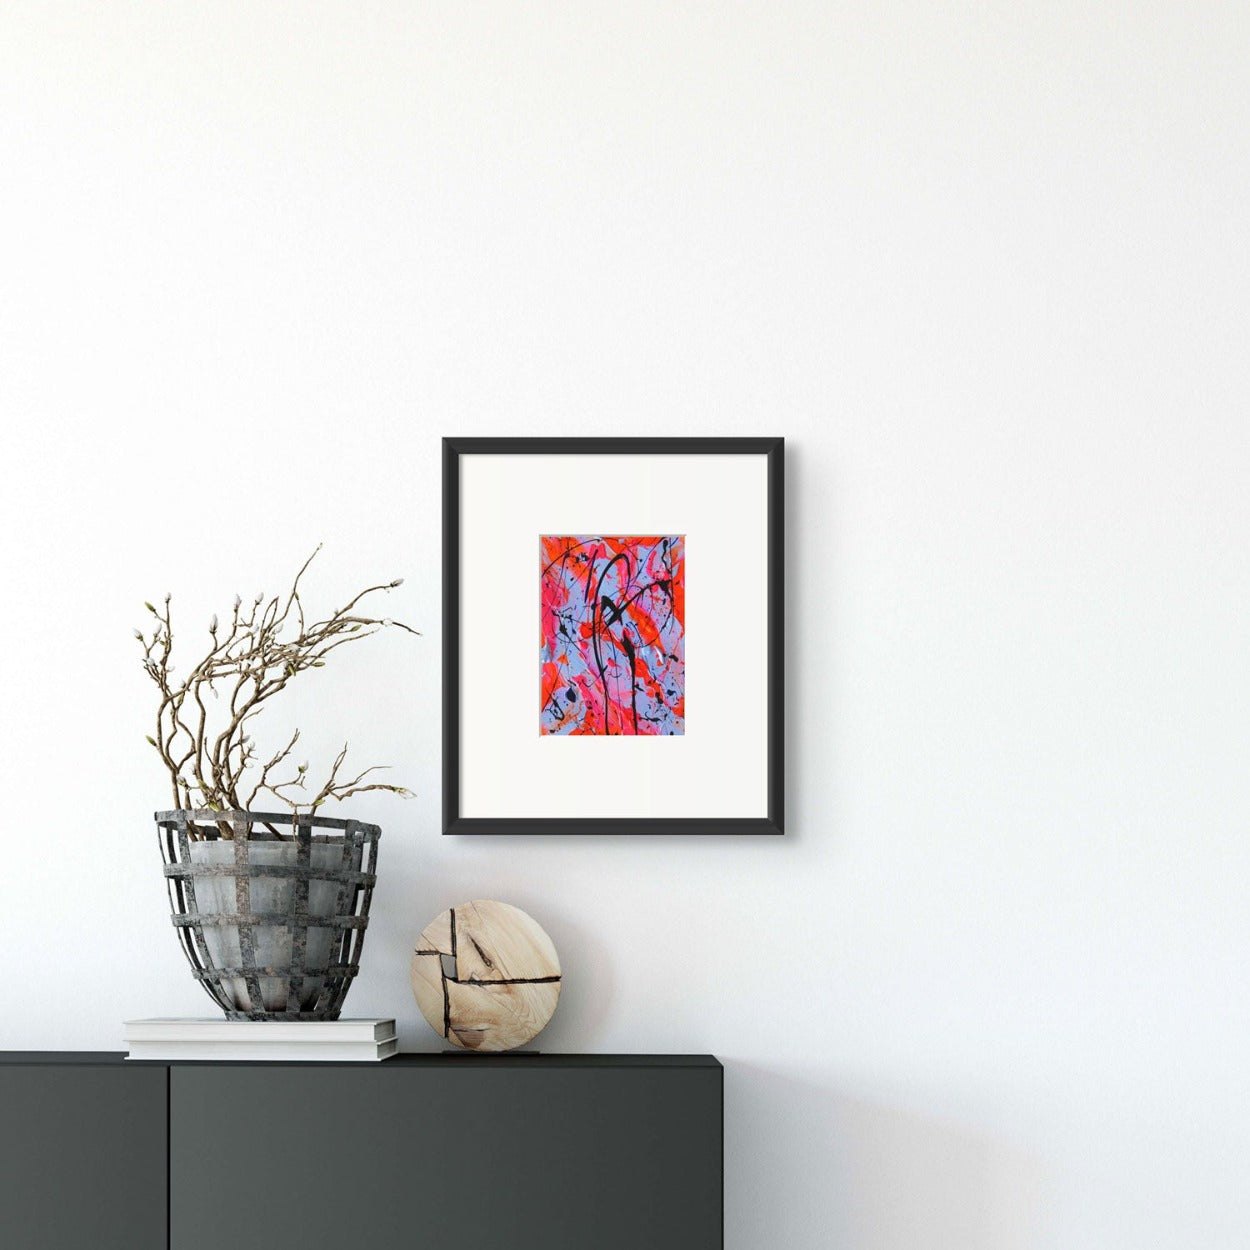 Little Luxuries XII, original small abstract painting by Bridget Bradley. Seen framed and hanging on wall with modern decor